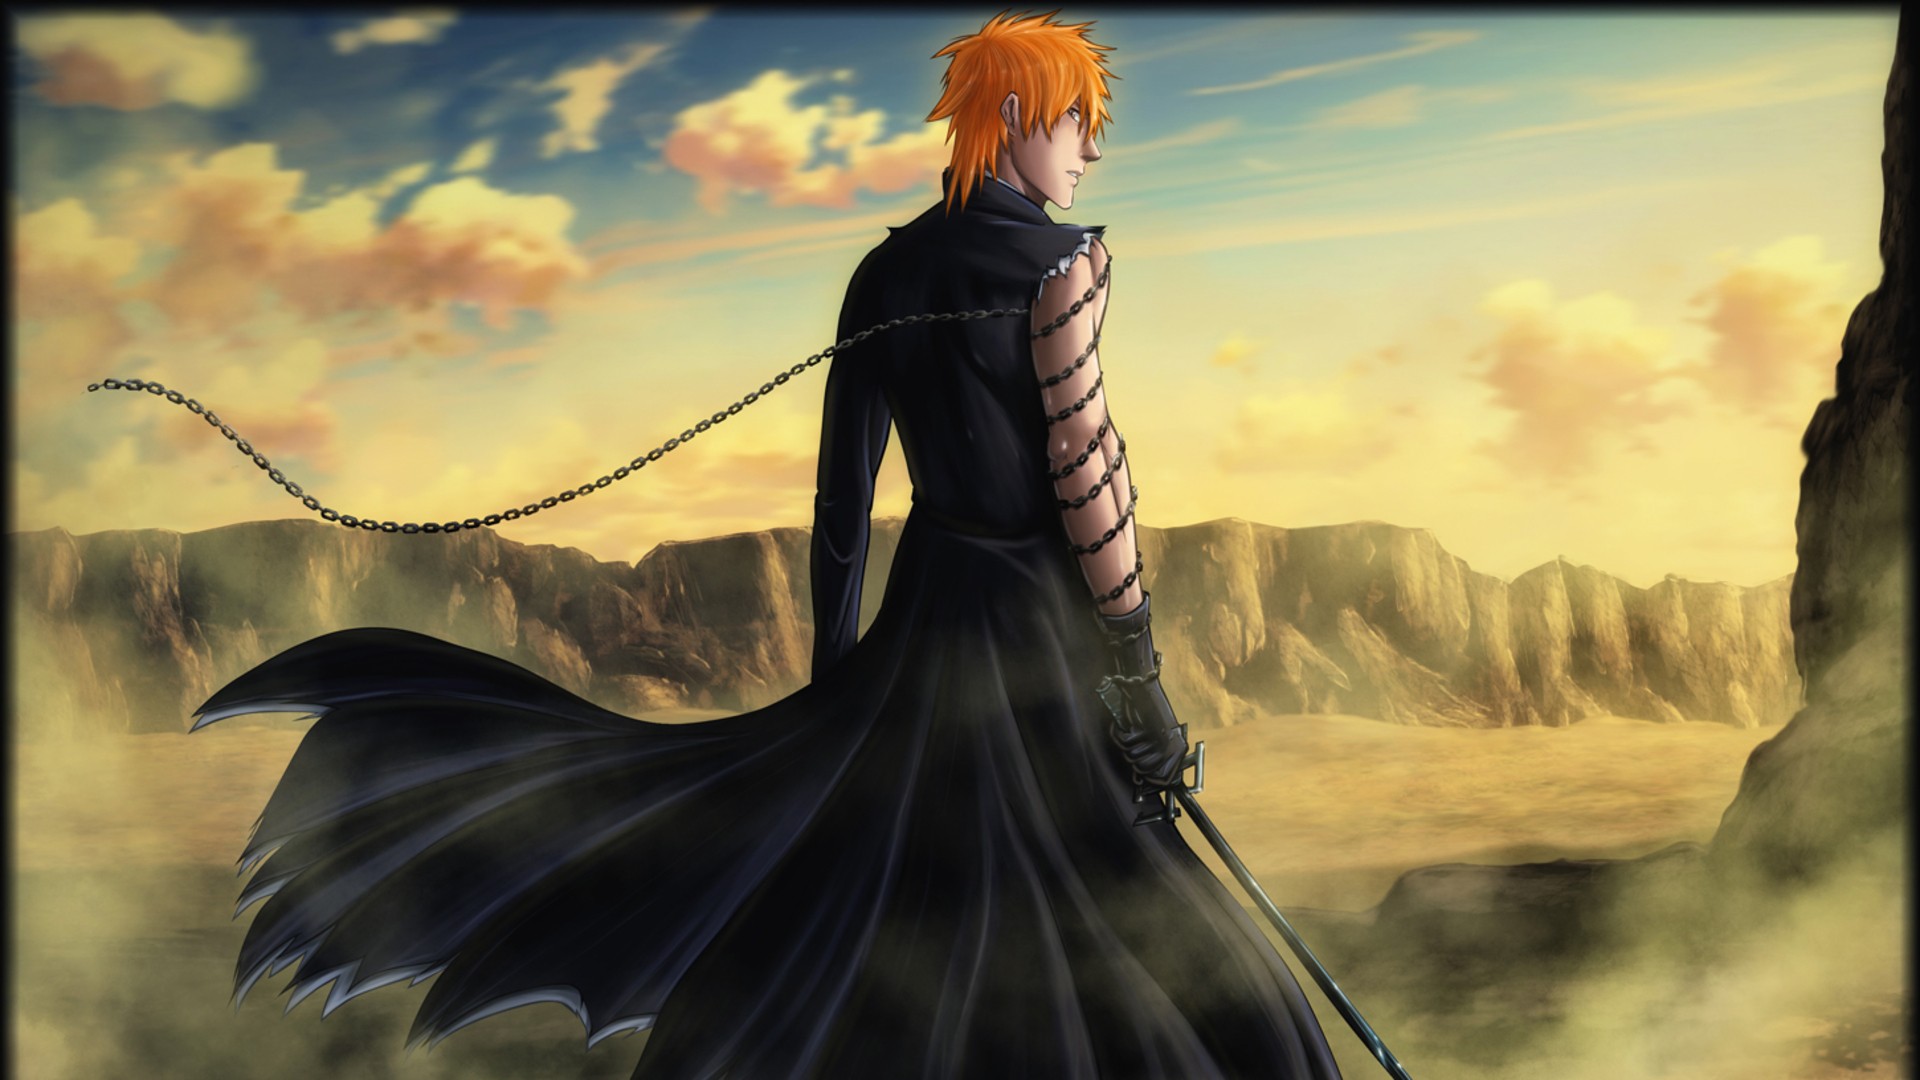 Pic. #Wallpaper #Wide #Bleach #Anime, 185891B – Unique HD Wallpapers